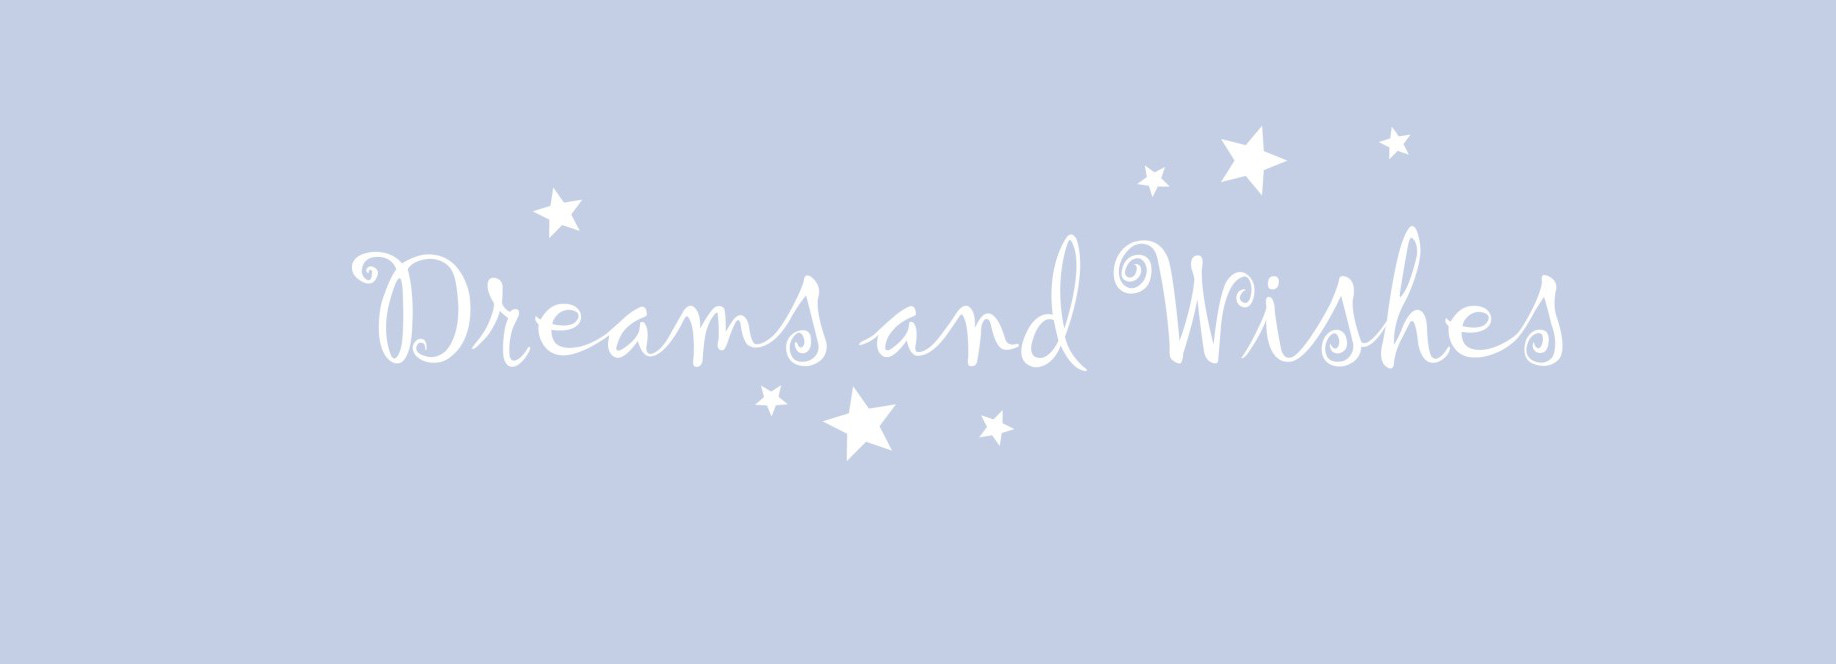 EXHIBITOR: Dreams and Wishes